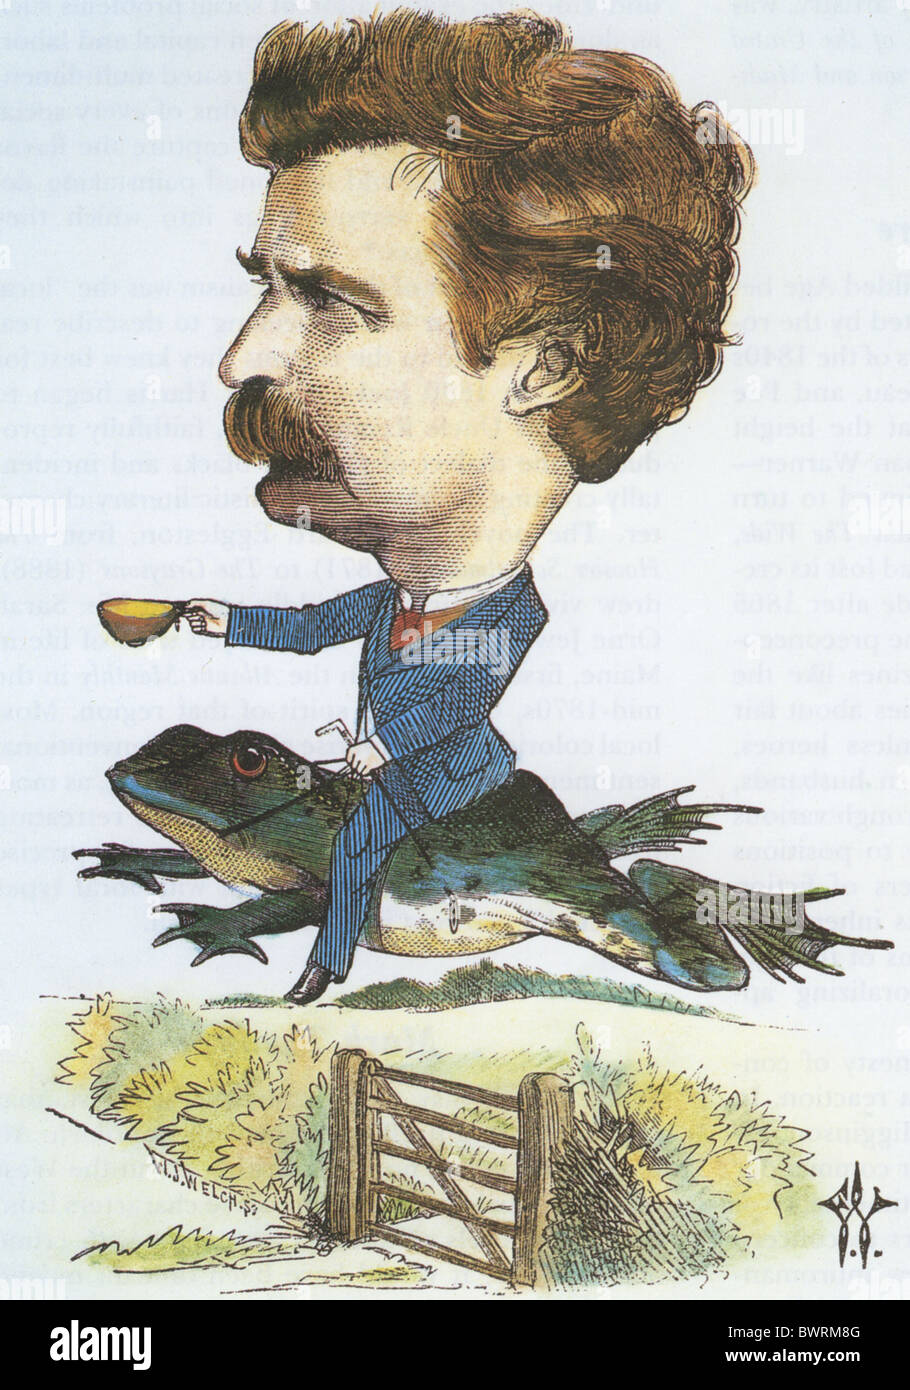 MARK TWAIN riding his 'Celebrated Jumping Frog of Calaveras County' in an 1872 cartoon by British artist Frederick Waddy Stock Photo